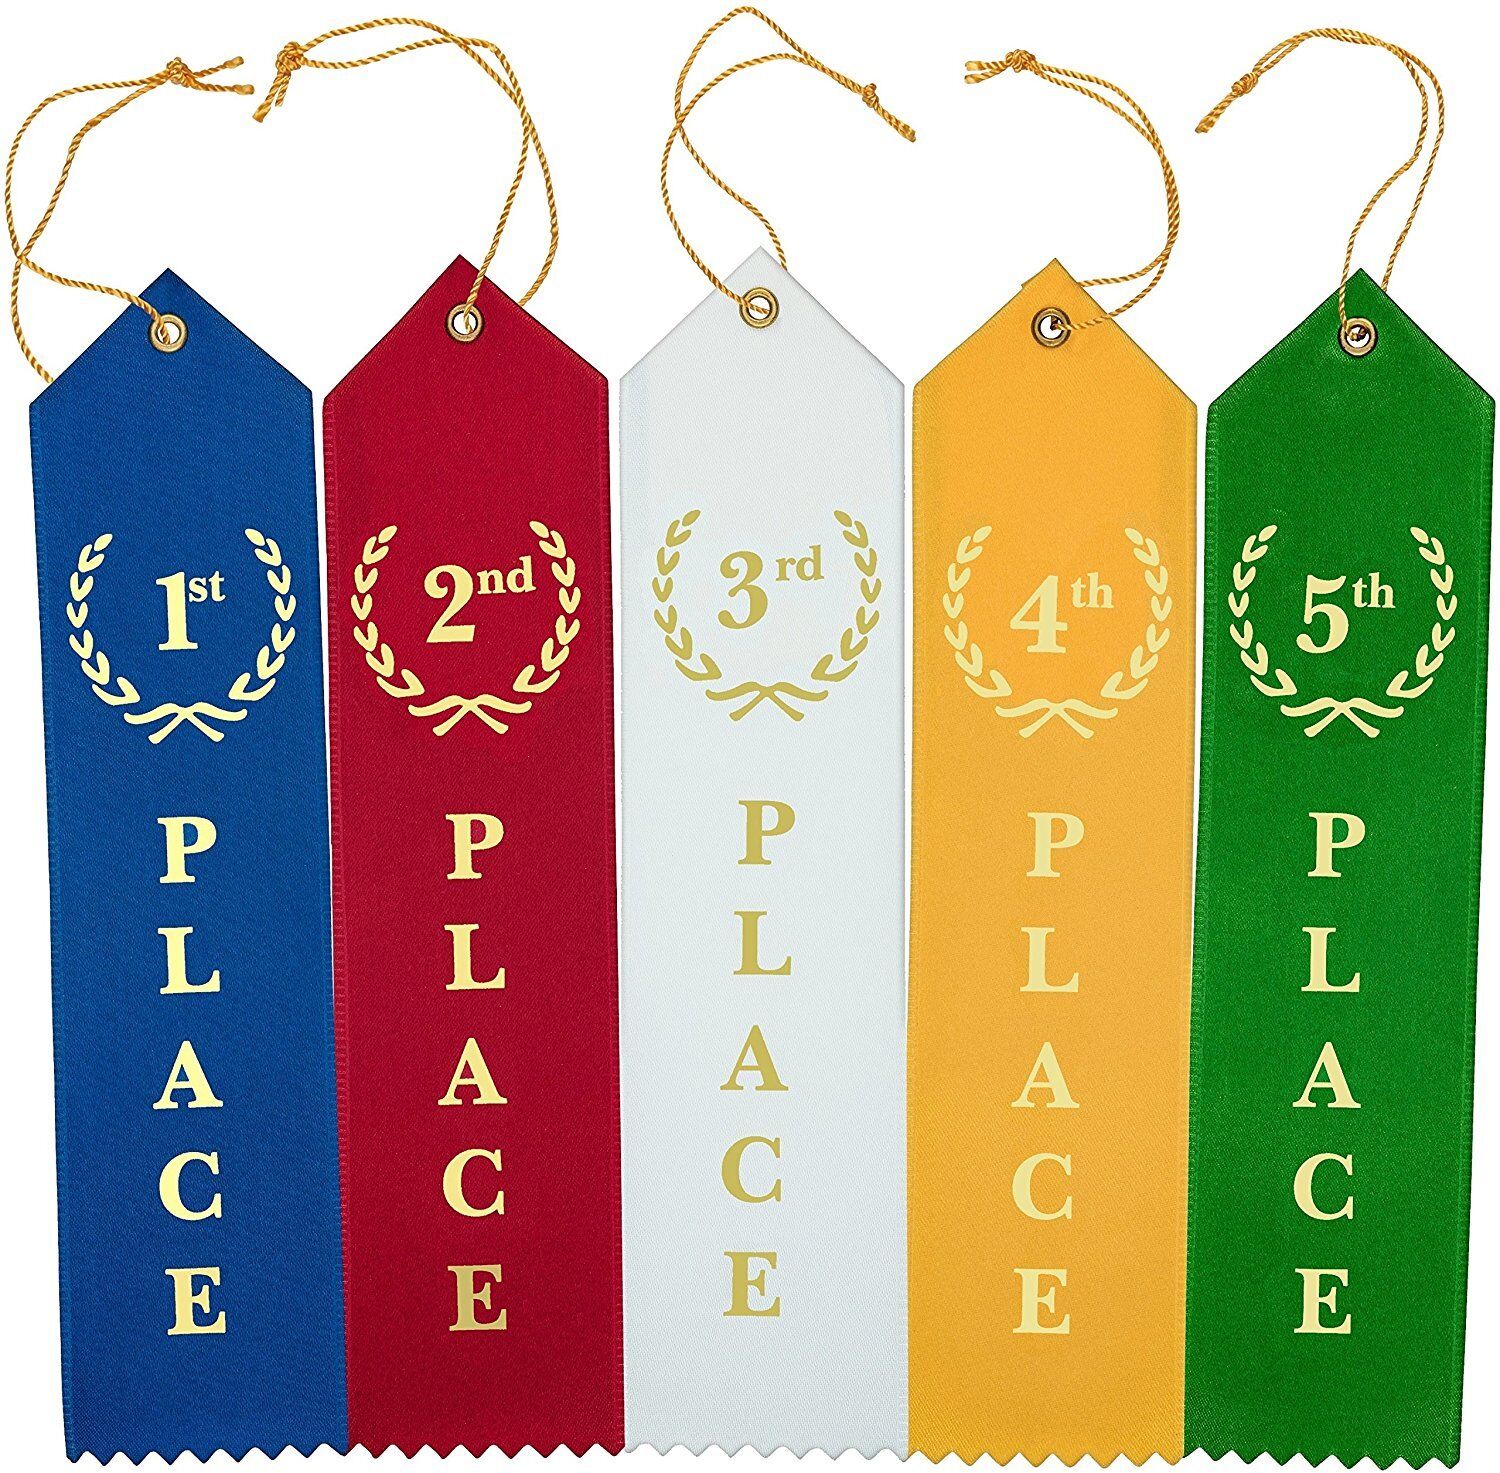 Flat Carded Award Ribbons 1st 2nd 3rd 4th 5th Place, Blue Red White Yellow Green Clinch Star CS-AR-FWC-1-5-60